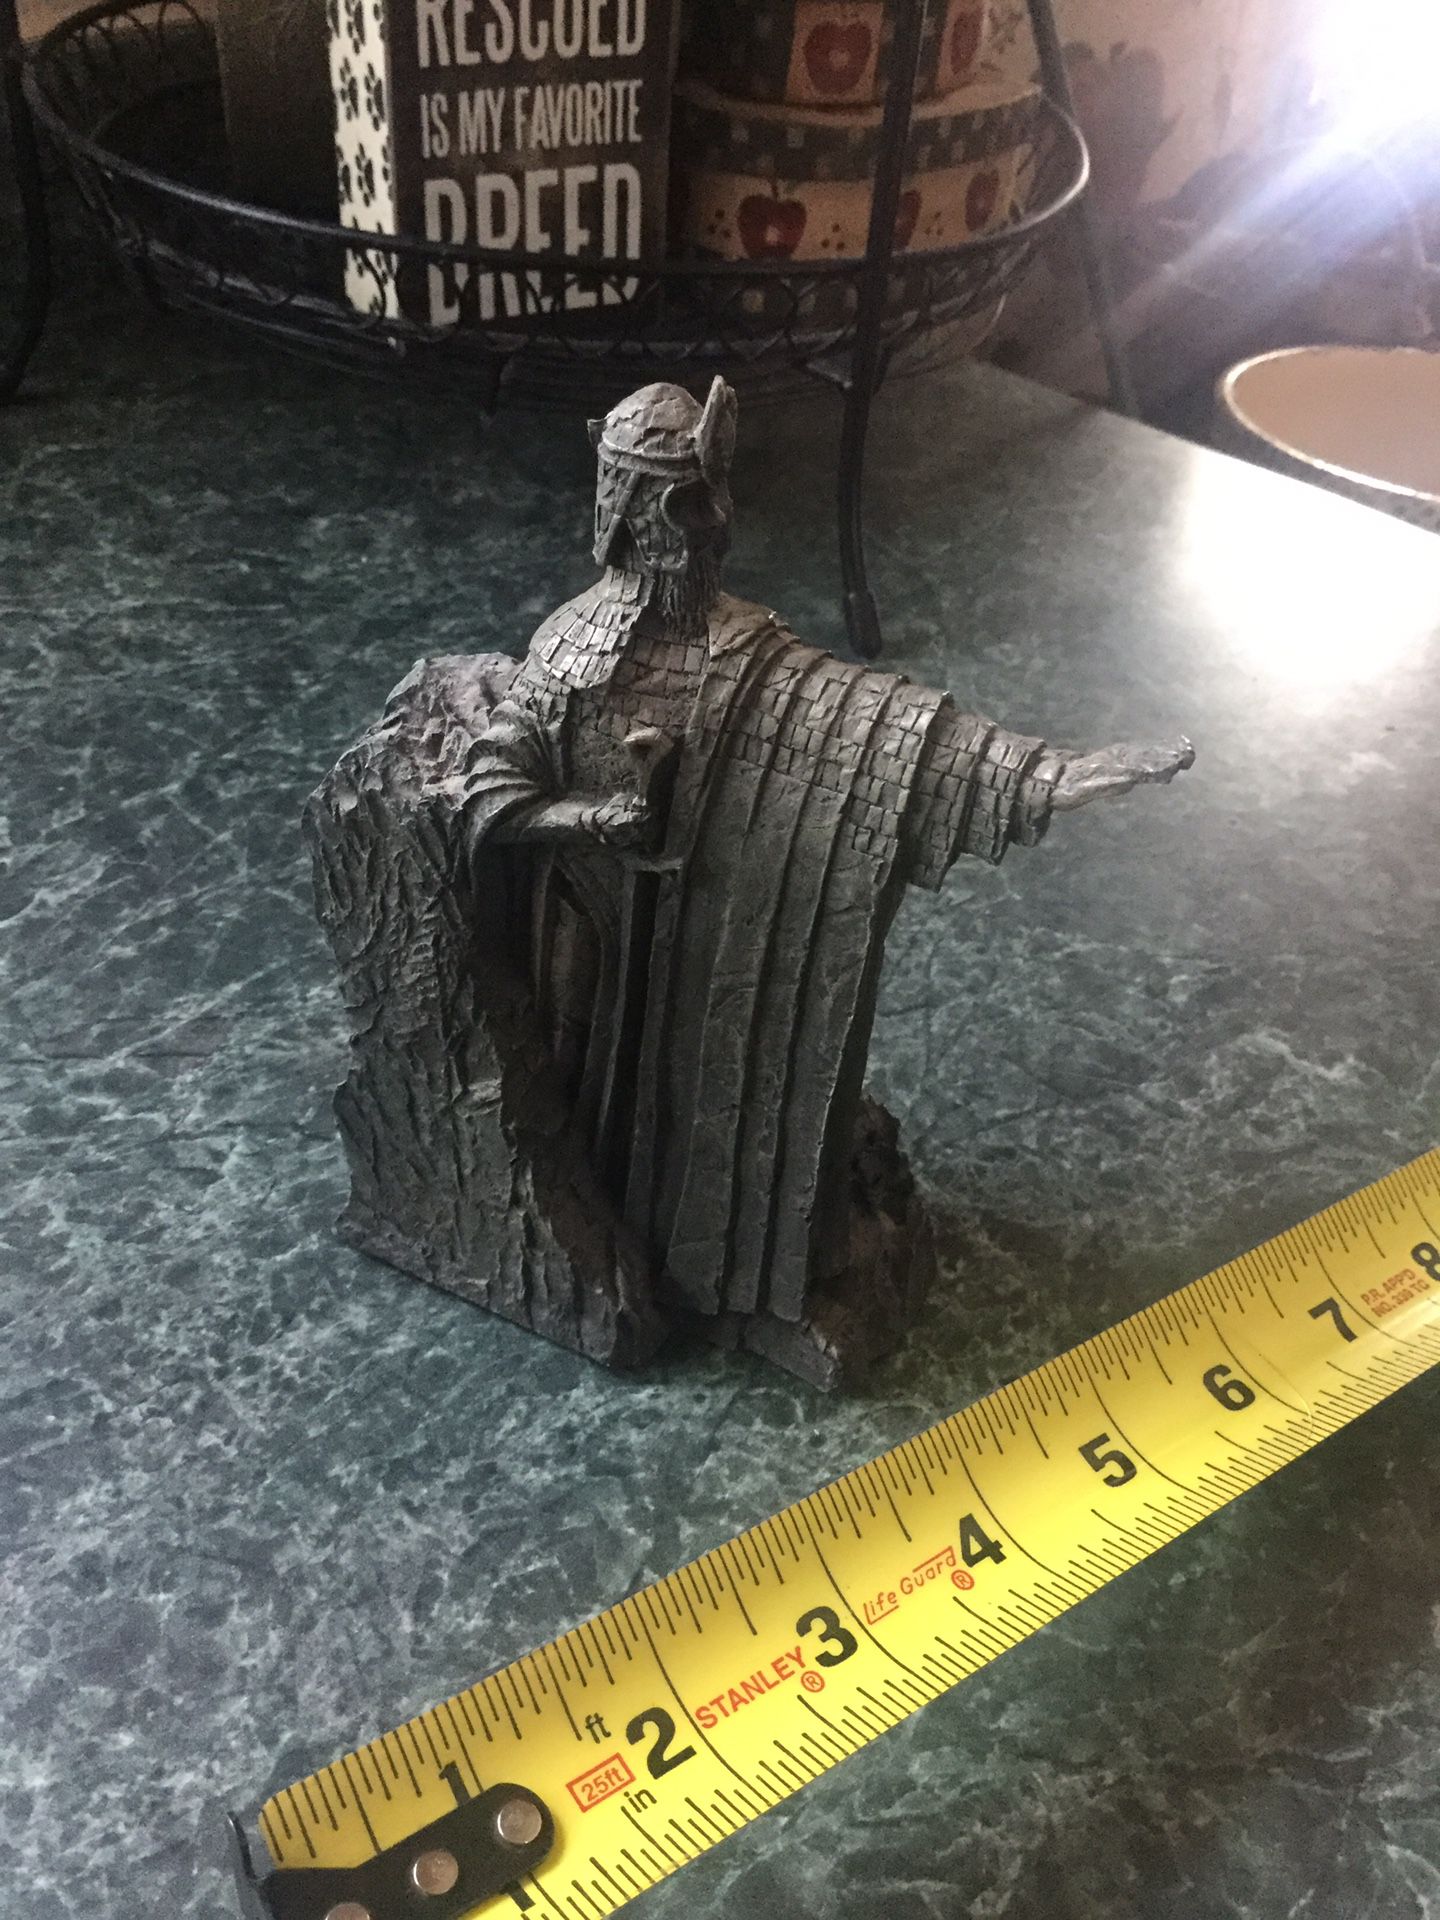 Sideshow-Weta-Collectible-Lord-of-the-Rings-The-Argonath-statue has small nick not noticeable